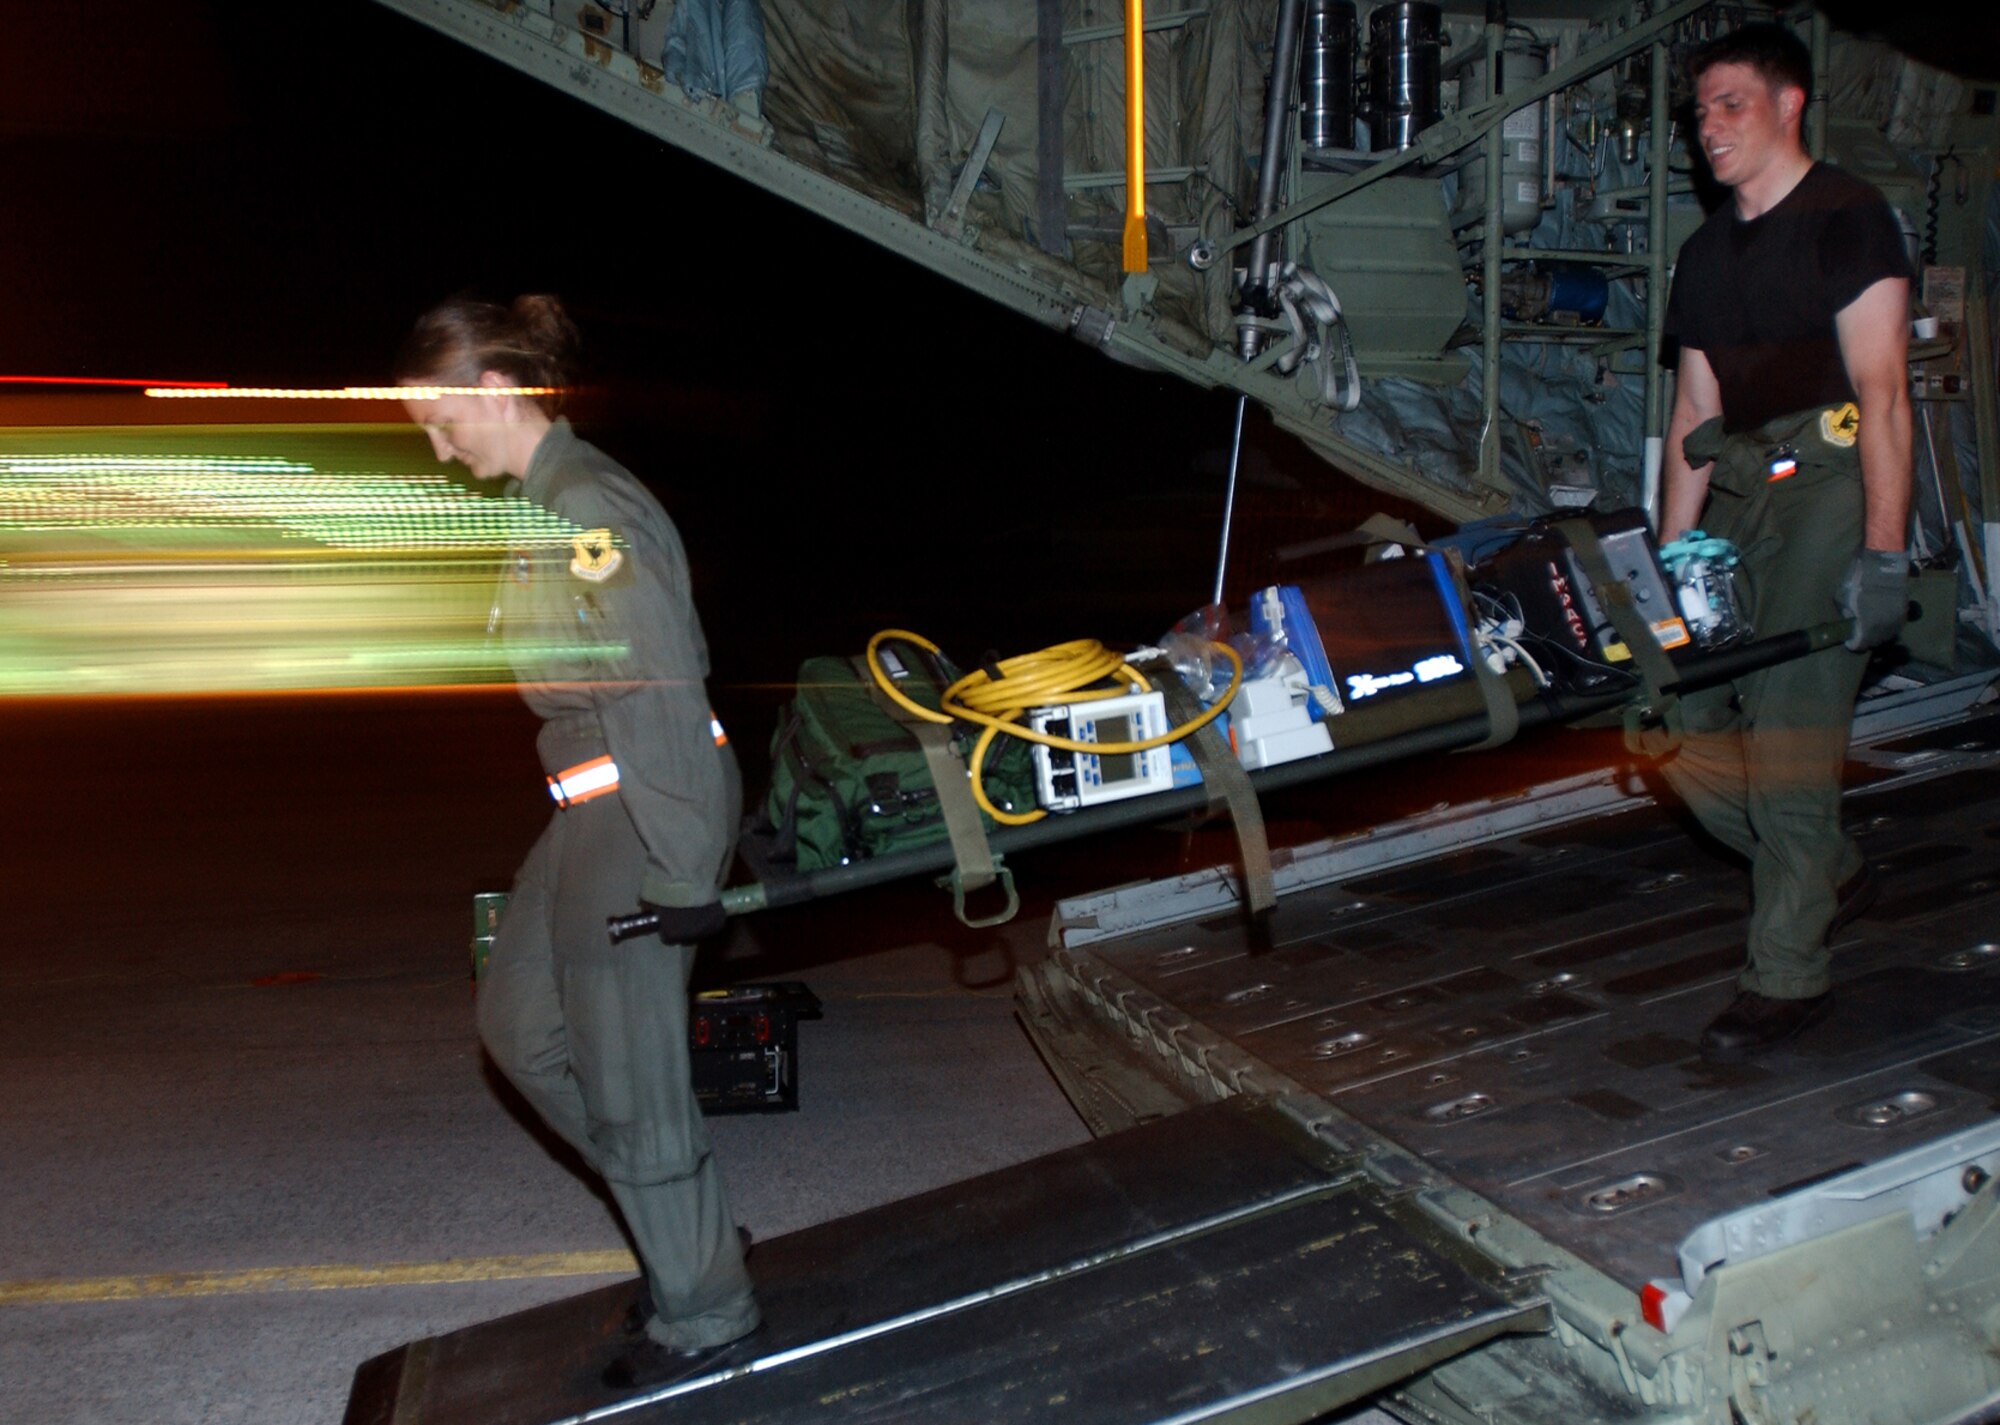 Staff Sgt. Erin Reifer and Senior Airman Kiley Gervitsen from the 18th Aeromedical Evacuation Squadron, Kadena Air Base, Japan, simulate evacuating casualties from a C-130 Hercules in Marine Corps Air Station Futenma, Japan, in preparation for Air Mobility Rodeo 2007. The unit practiced in the evenings to simulate night time operations for wartime missions. U.S. Air Force photo/Staff Sgt. Reynaldo Ramon